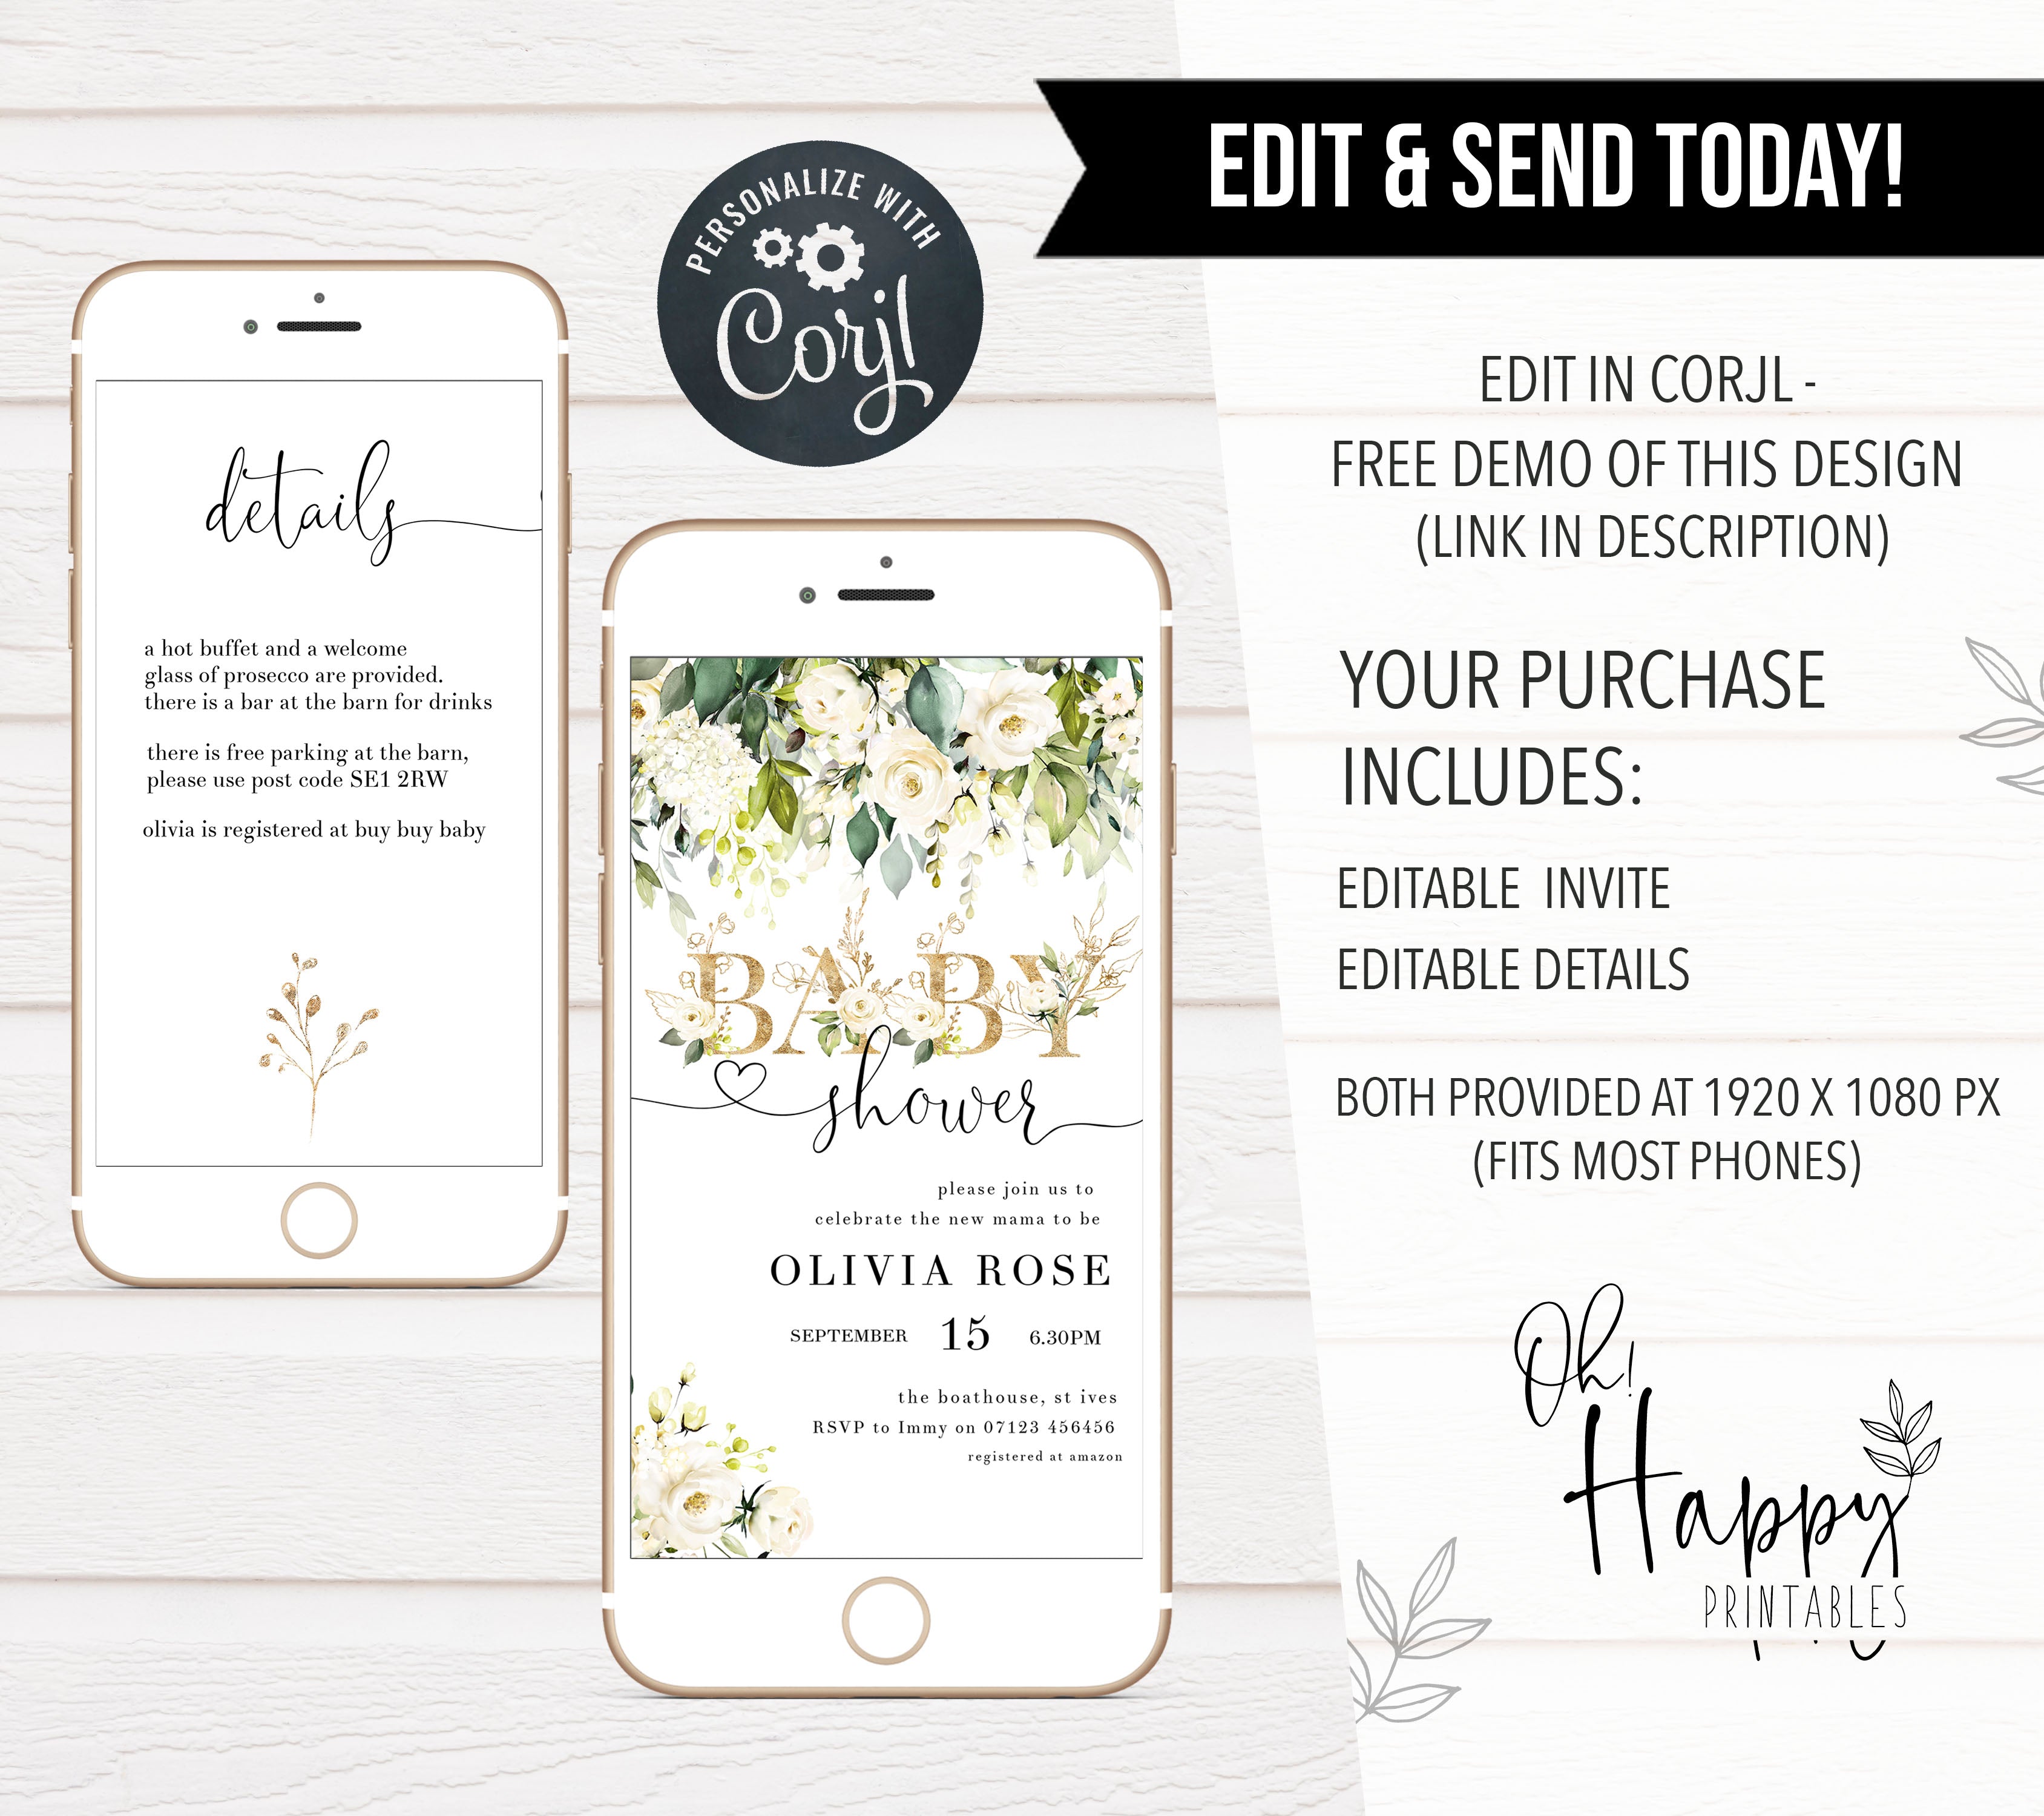 white floral baby shower invitations, printable baby shower invitations, editable baby shower invitations, floral baby invites, white floral baby mobile invitations